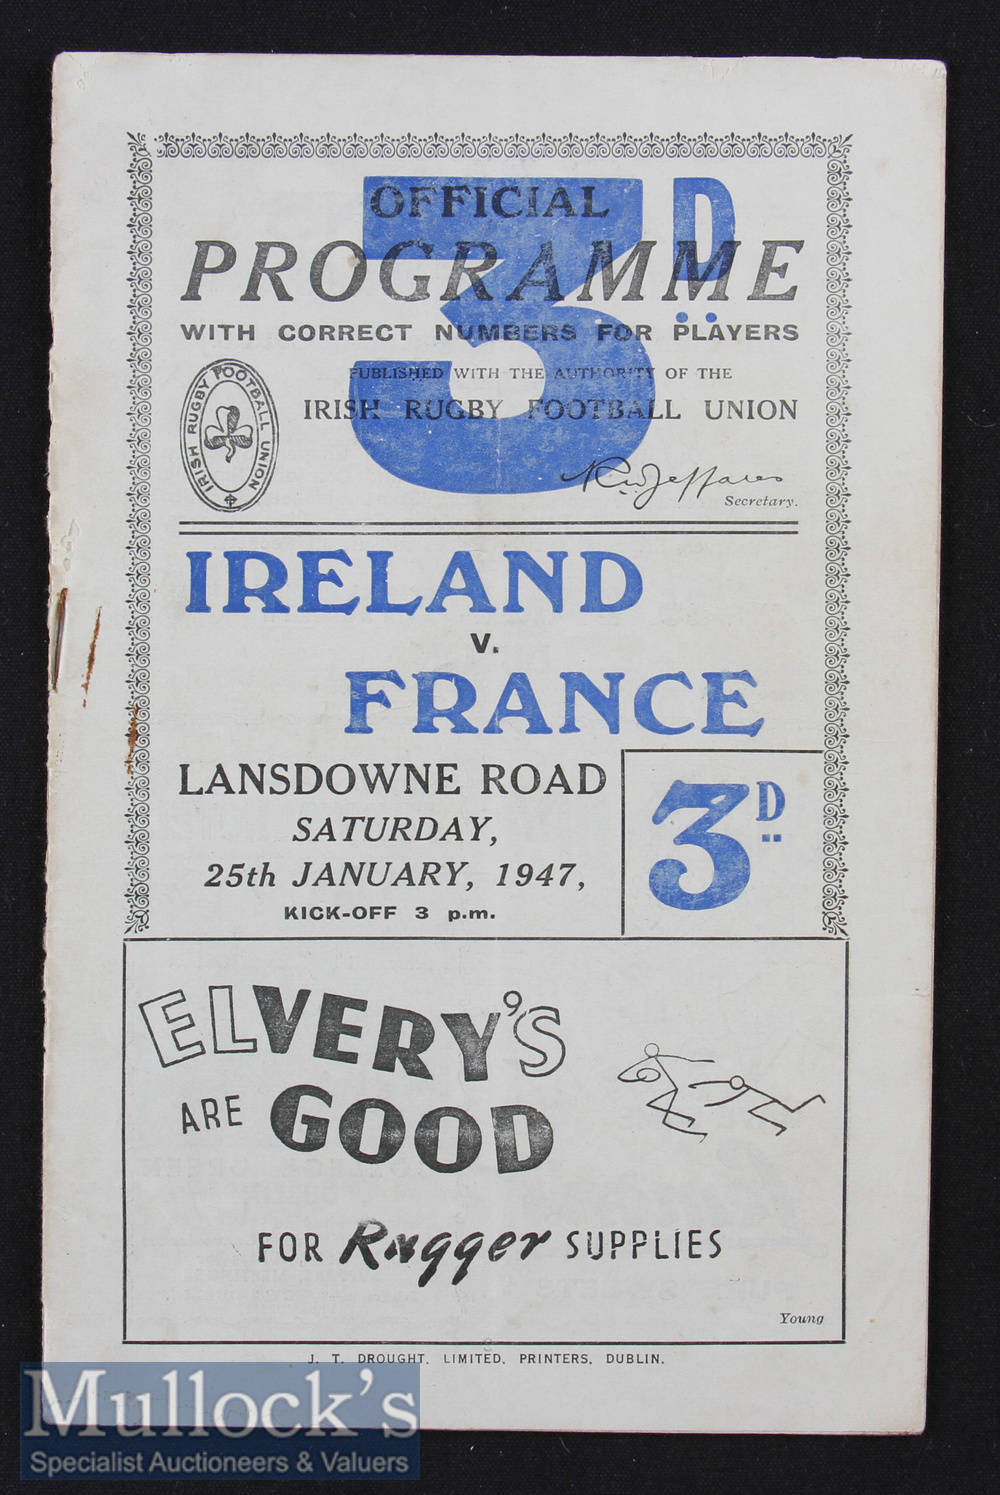 1947 Ireland v France Rugby Programme: Small staple rust mark and minor tear to top of rear cover^